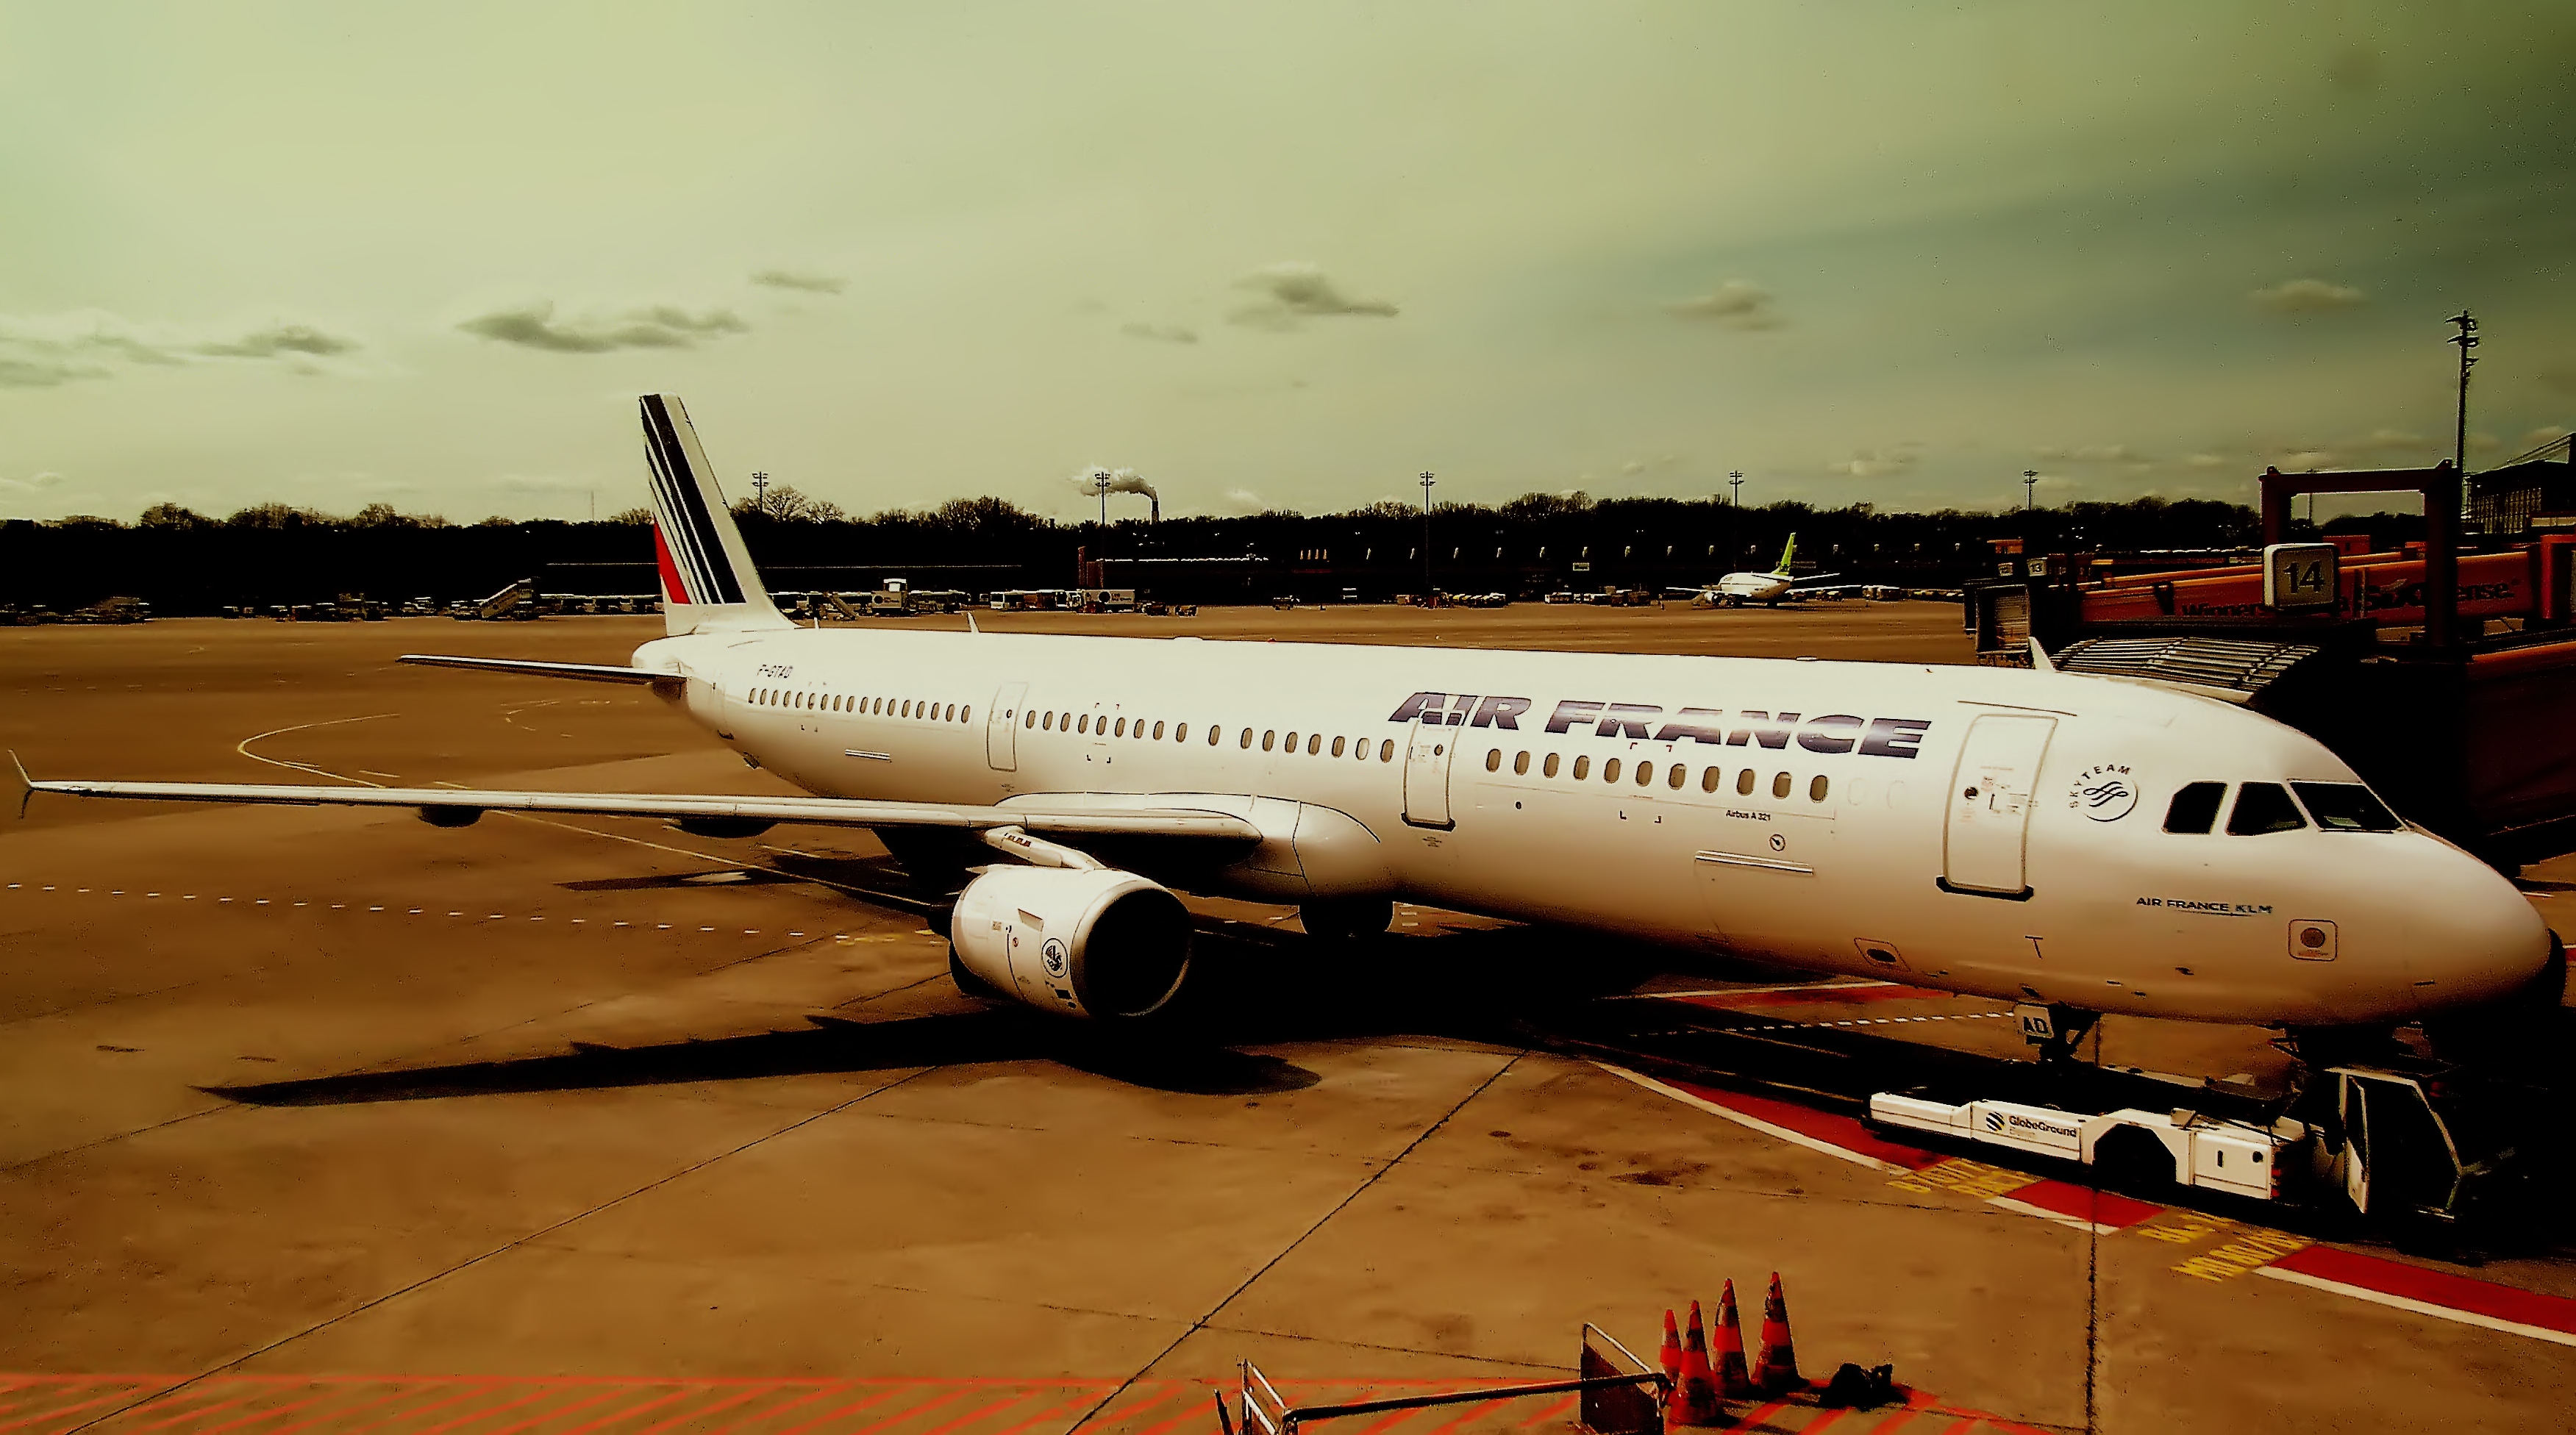 AIR FRANCE AIRBUS A321 AT BERLIN TEGAL FLUGHAFEN GERMANY APRIL 2012 (7100019025)